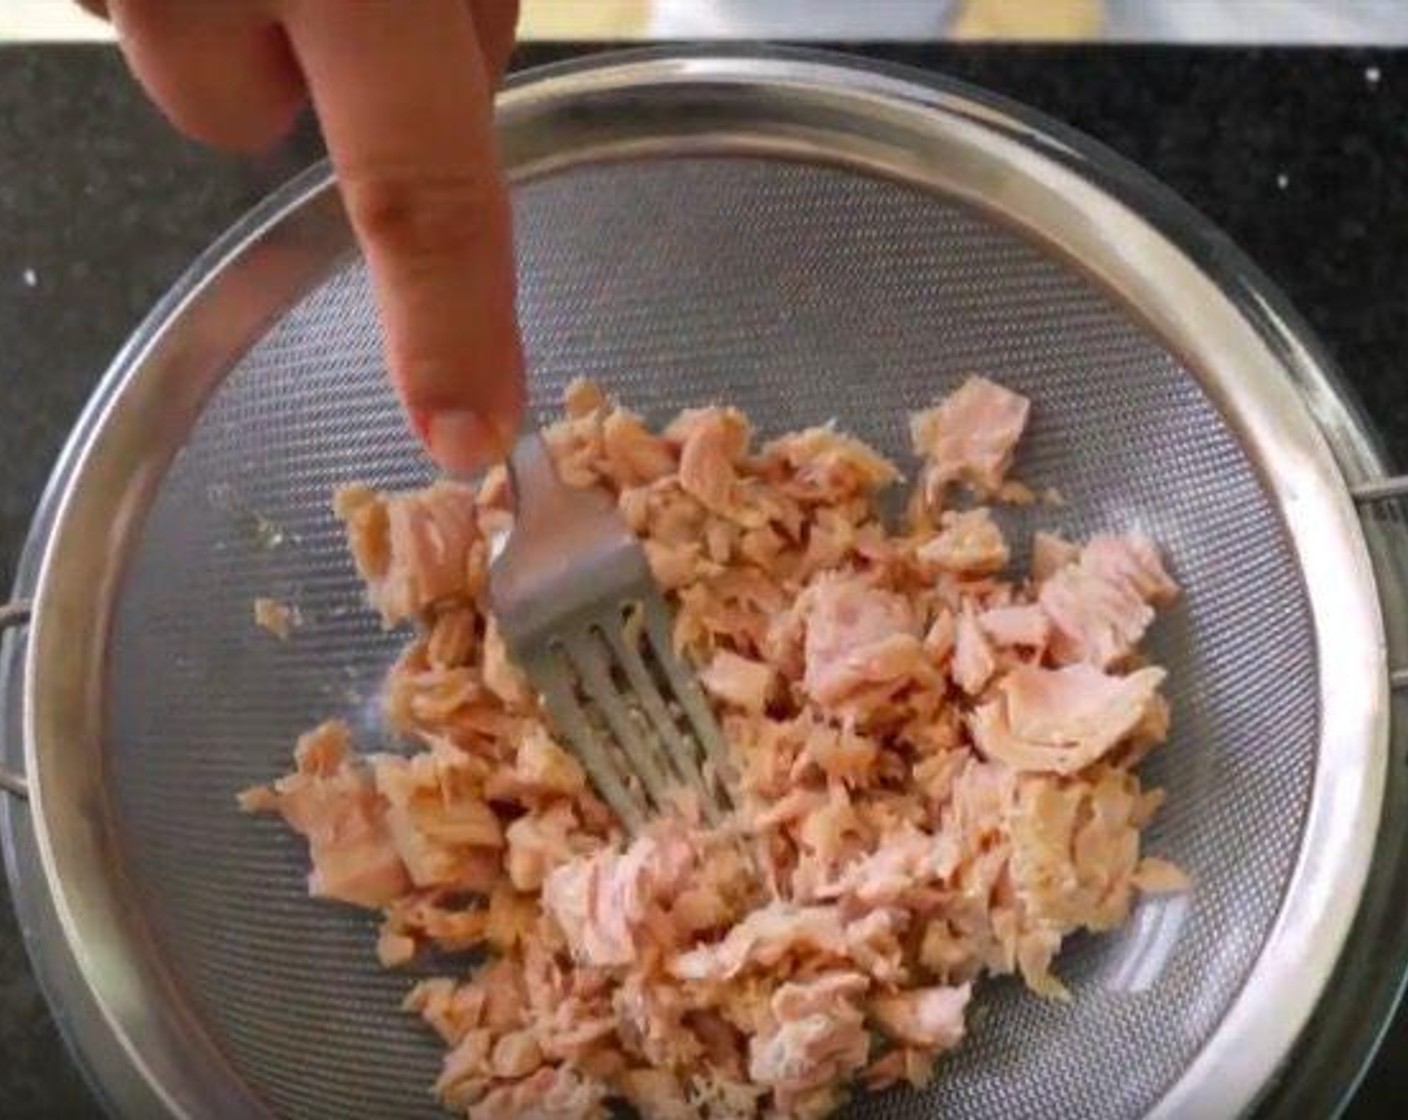 step 4 To make the tuna cakes grab the Canned Tuna (2 cans), drain the liquid, add the tuna to a sieve and using a fork flake the tuna to remove any excess liquid, add the tuna to a large bowl.